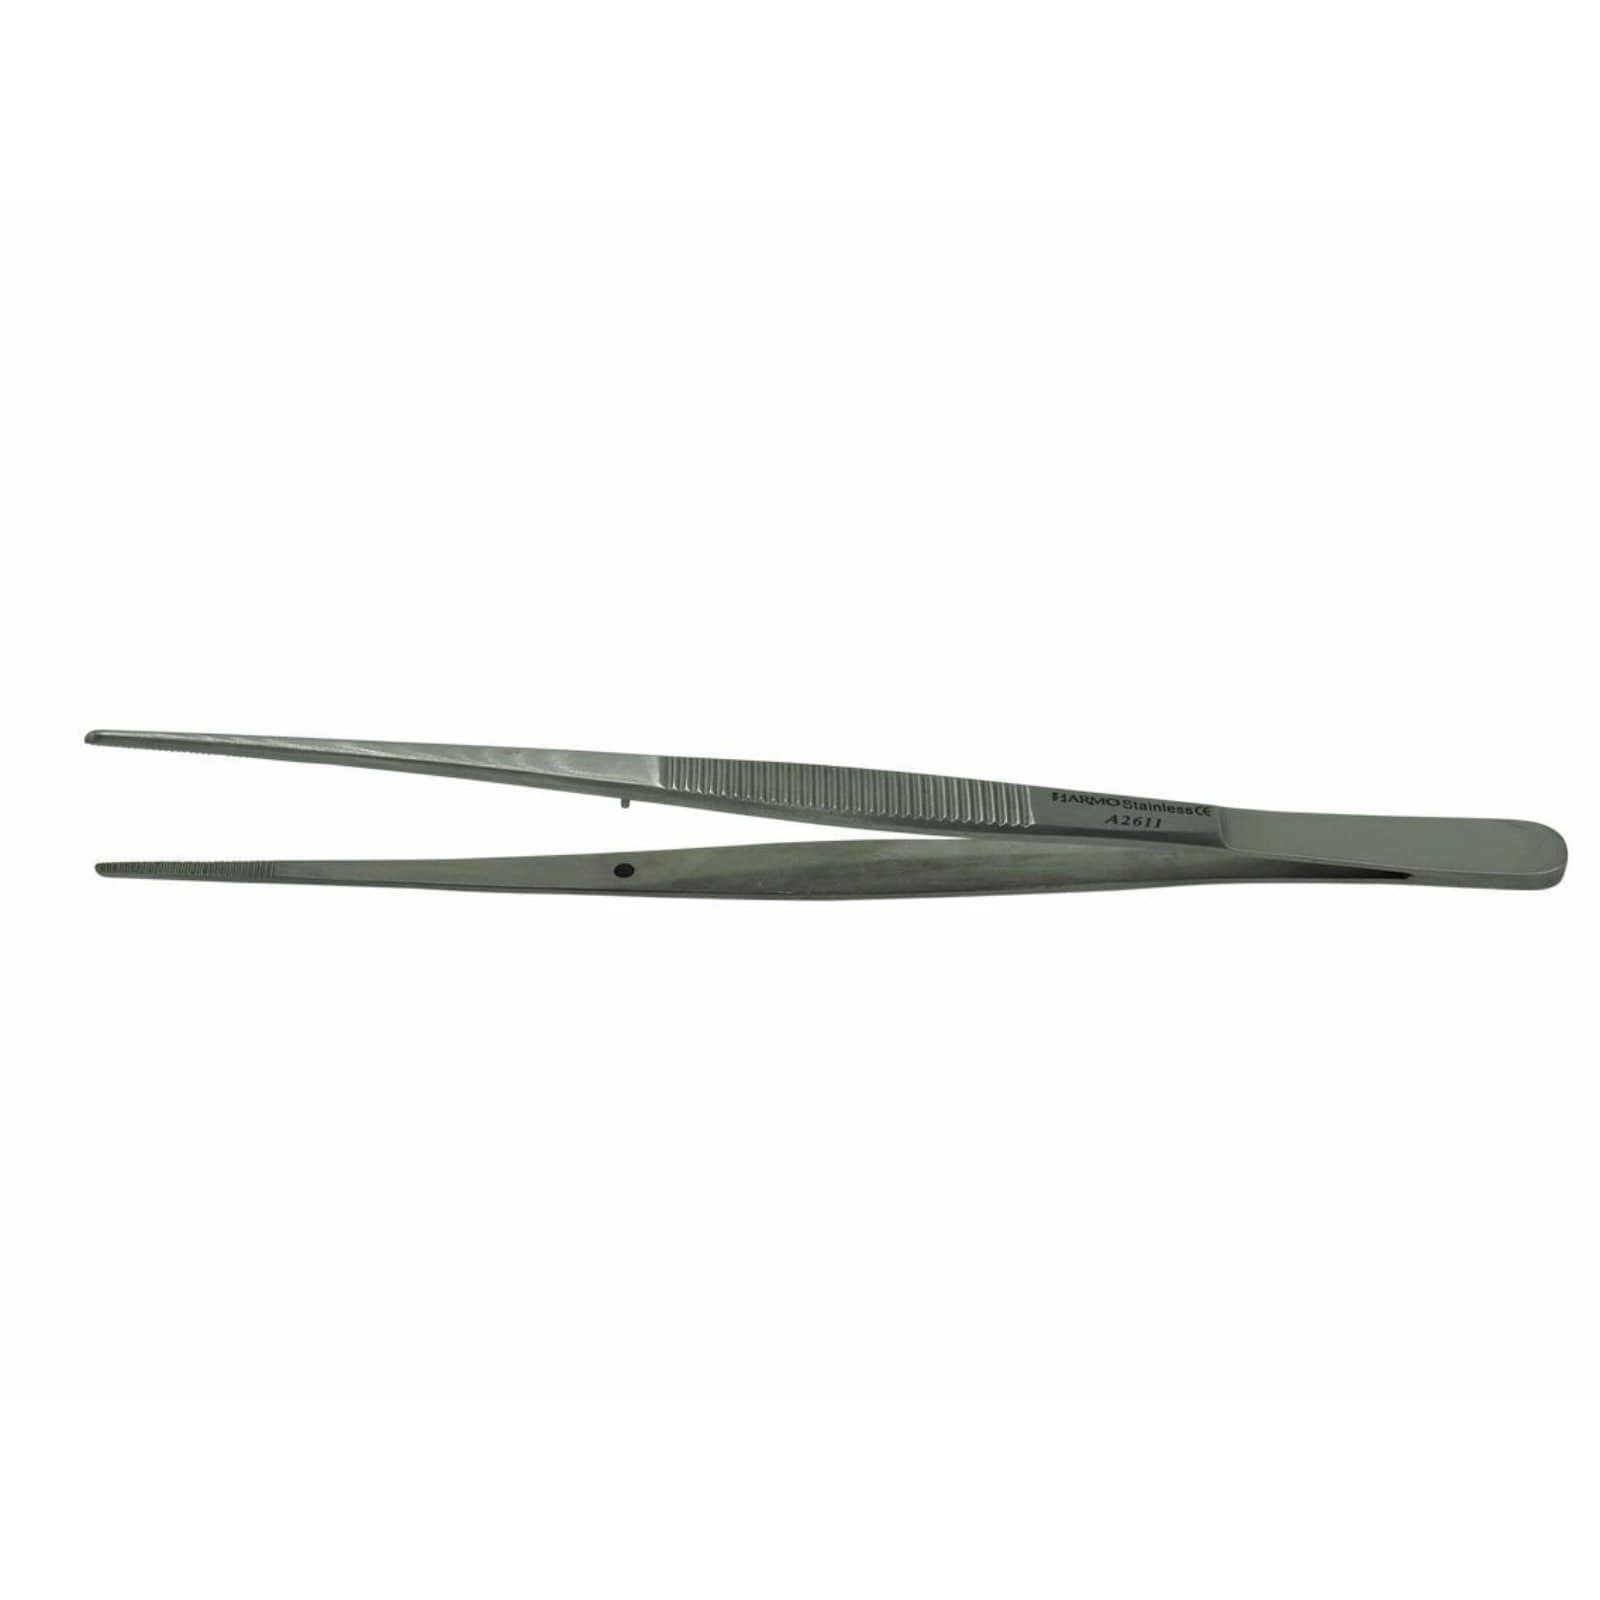 Armo Surgical Instruments 15cm / Standard Armo Semken Tissue Forcep